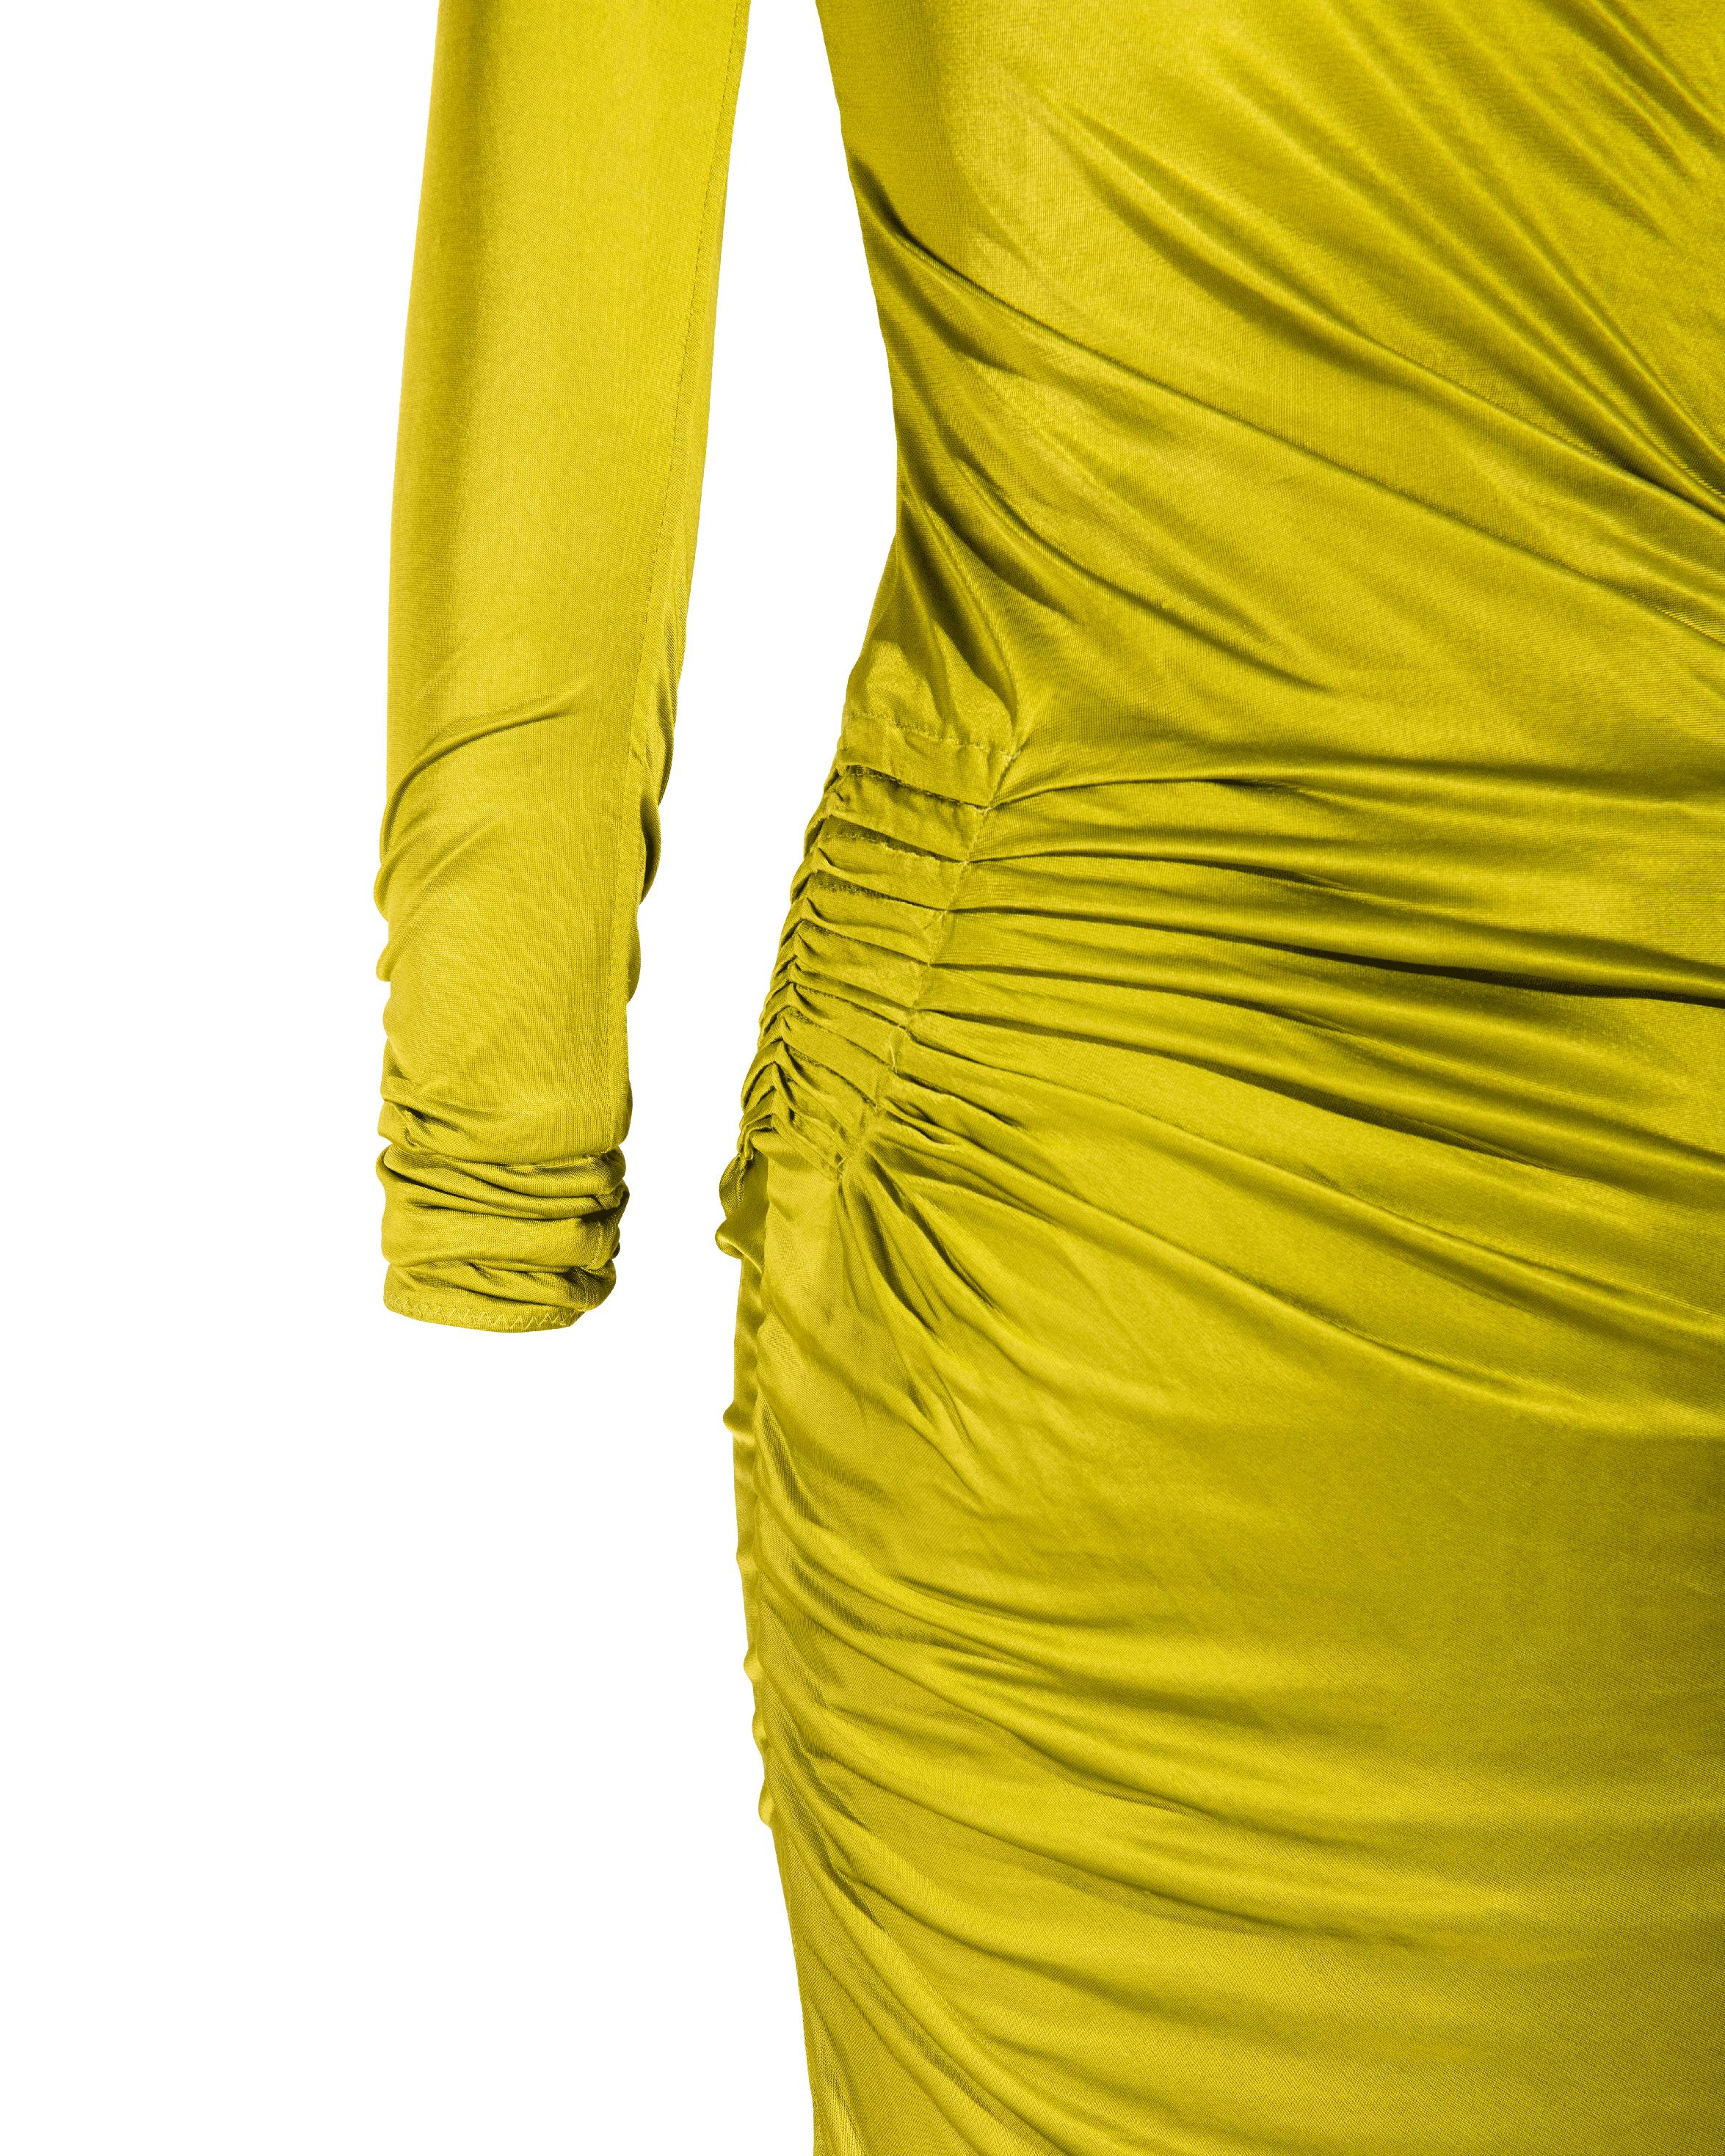 c. 2003 Gucci by Tom Ford Asymmetrical Chartreuse Long Sleeve Dress 1